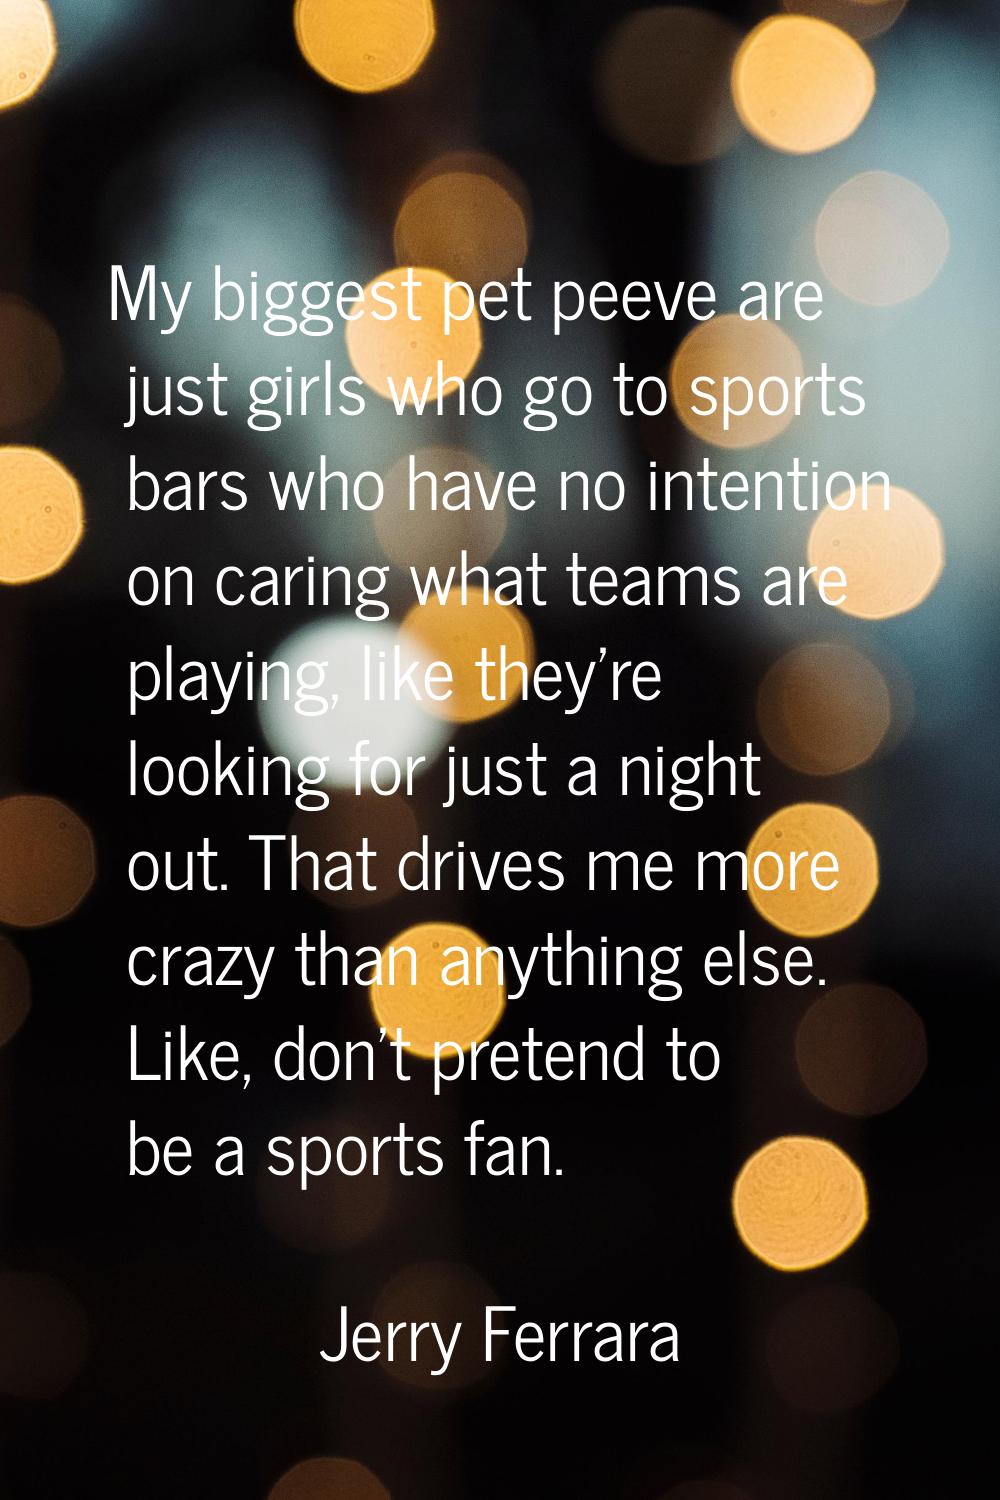 My biggest pet peeve are just girls who go to sports bars who have no intention on caring what team